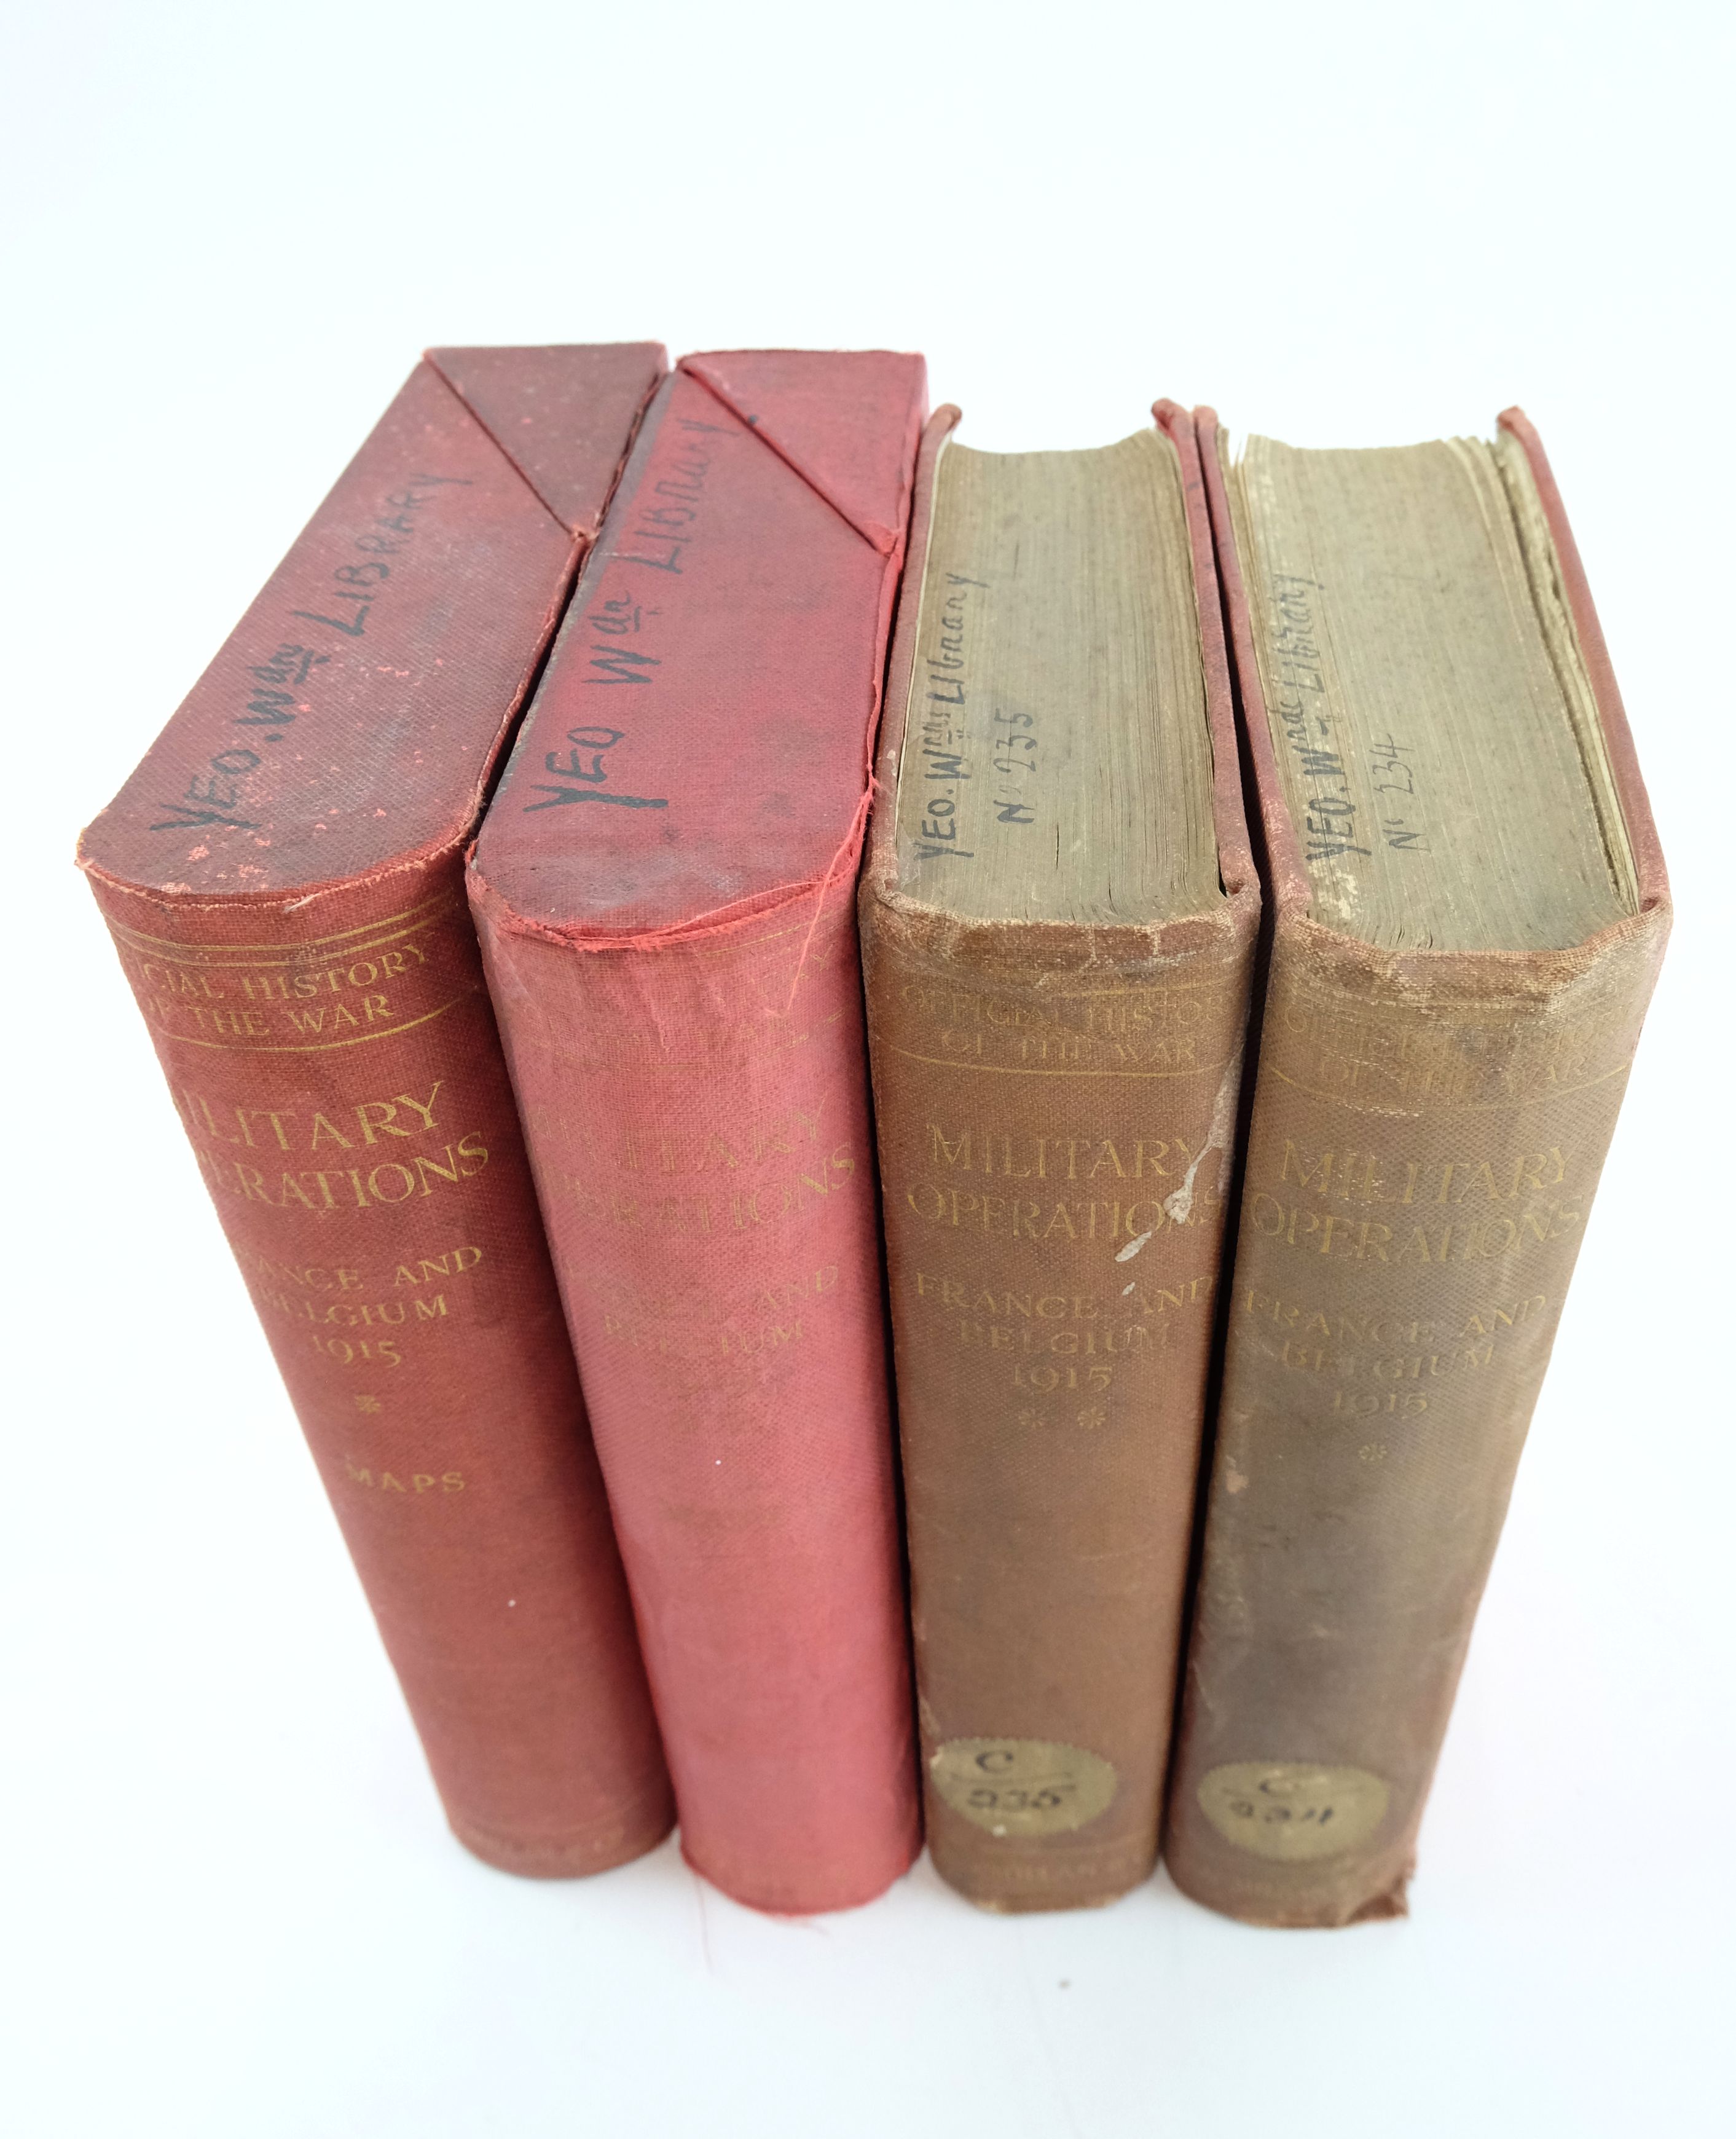 Photo of MILITARY OPERATIONS FRANCE AND BELGIUM 1915 (4 VOLUMES) written by Edmonds, James E.
Wynne, G.C. illustrated by Becke, A.F. published by Macmillan & Co. Ltd. (STOCK CODE: 1824306)  for sale by Stella & Rose's Books